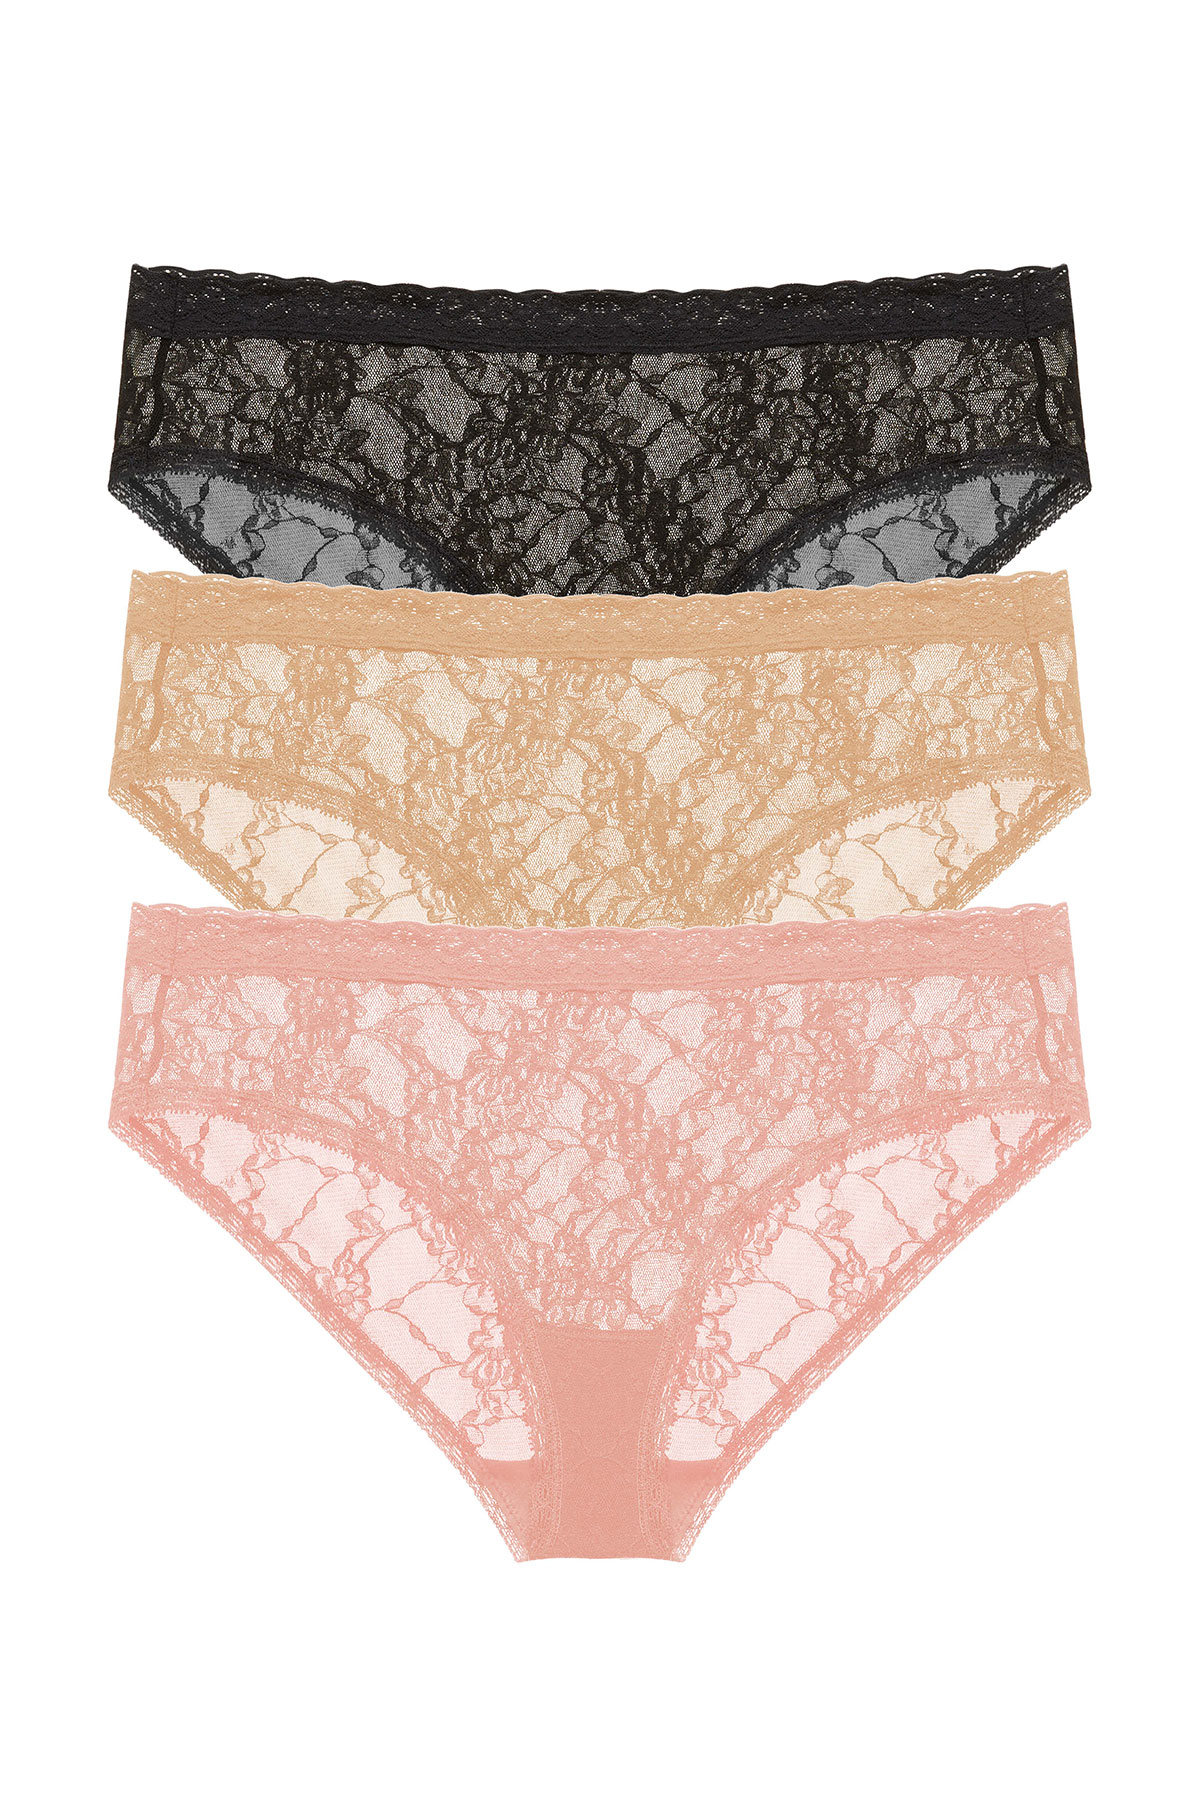 Bliss Allure One-Size Lace Girl Brief 3-Pack